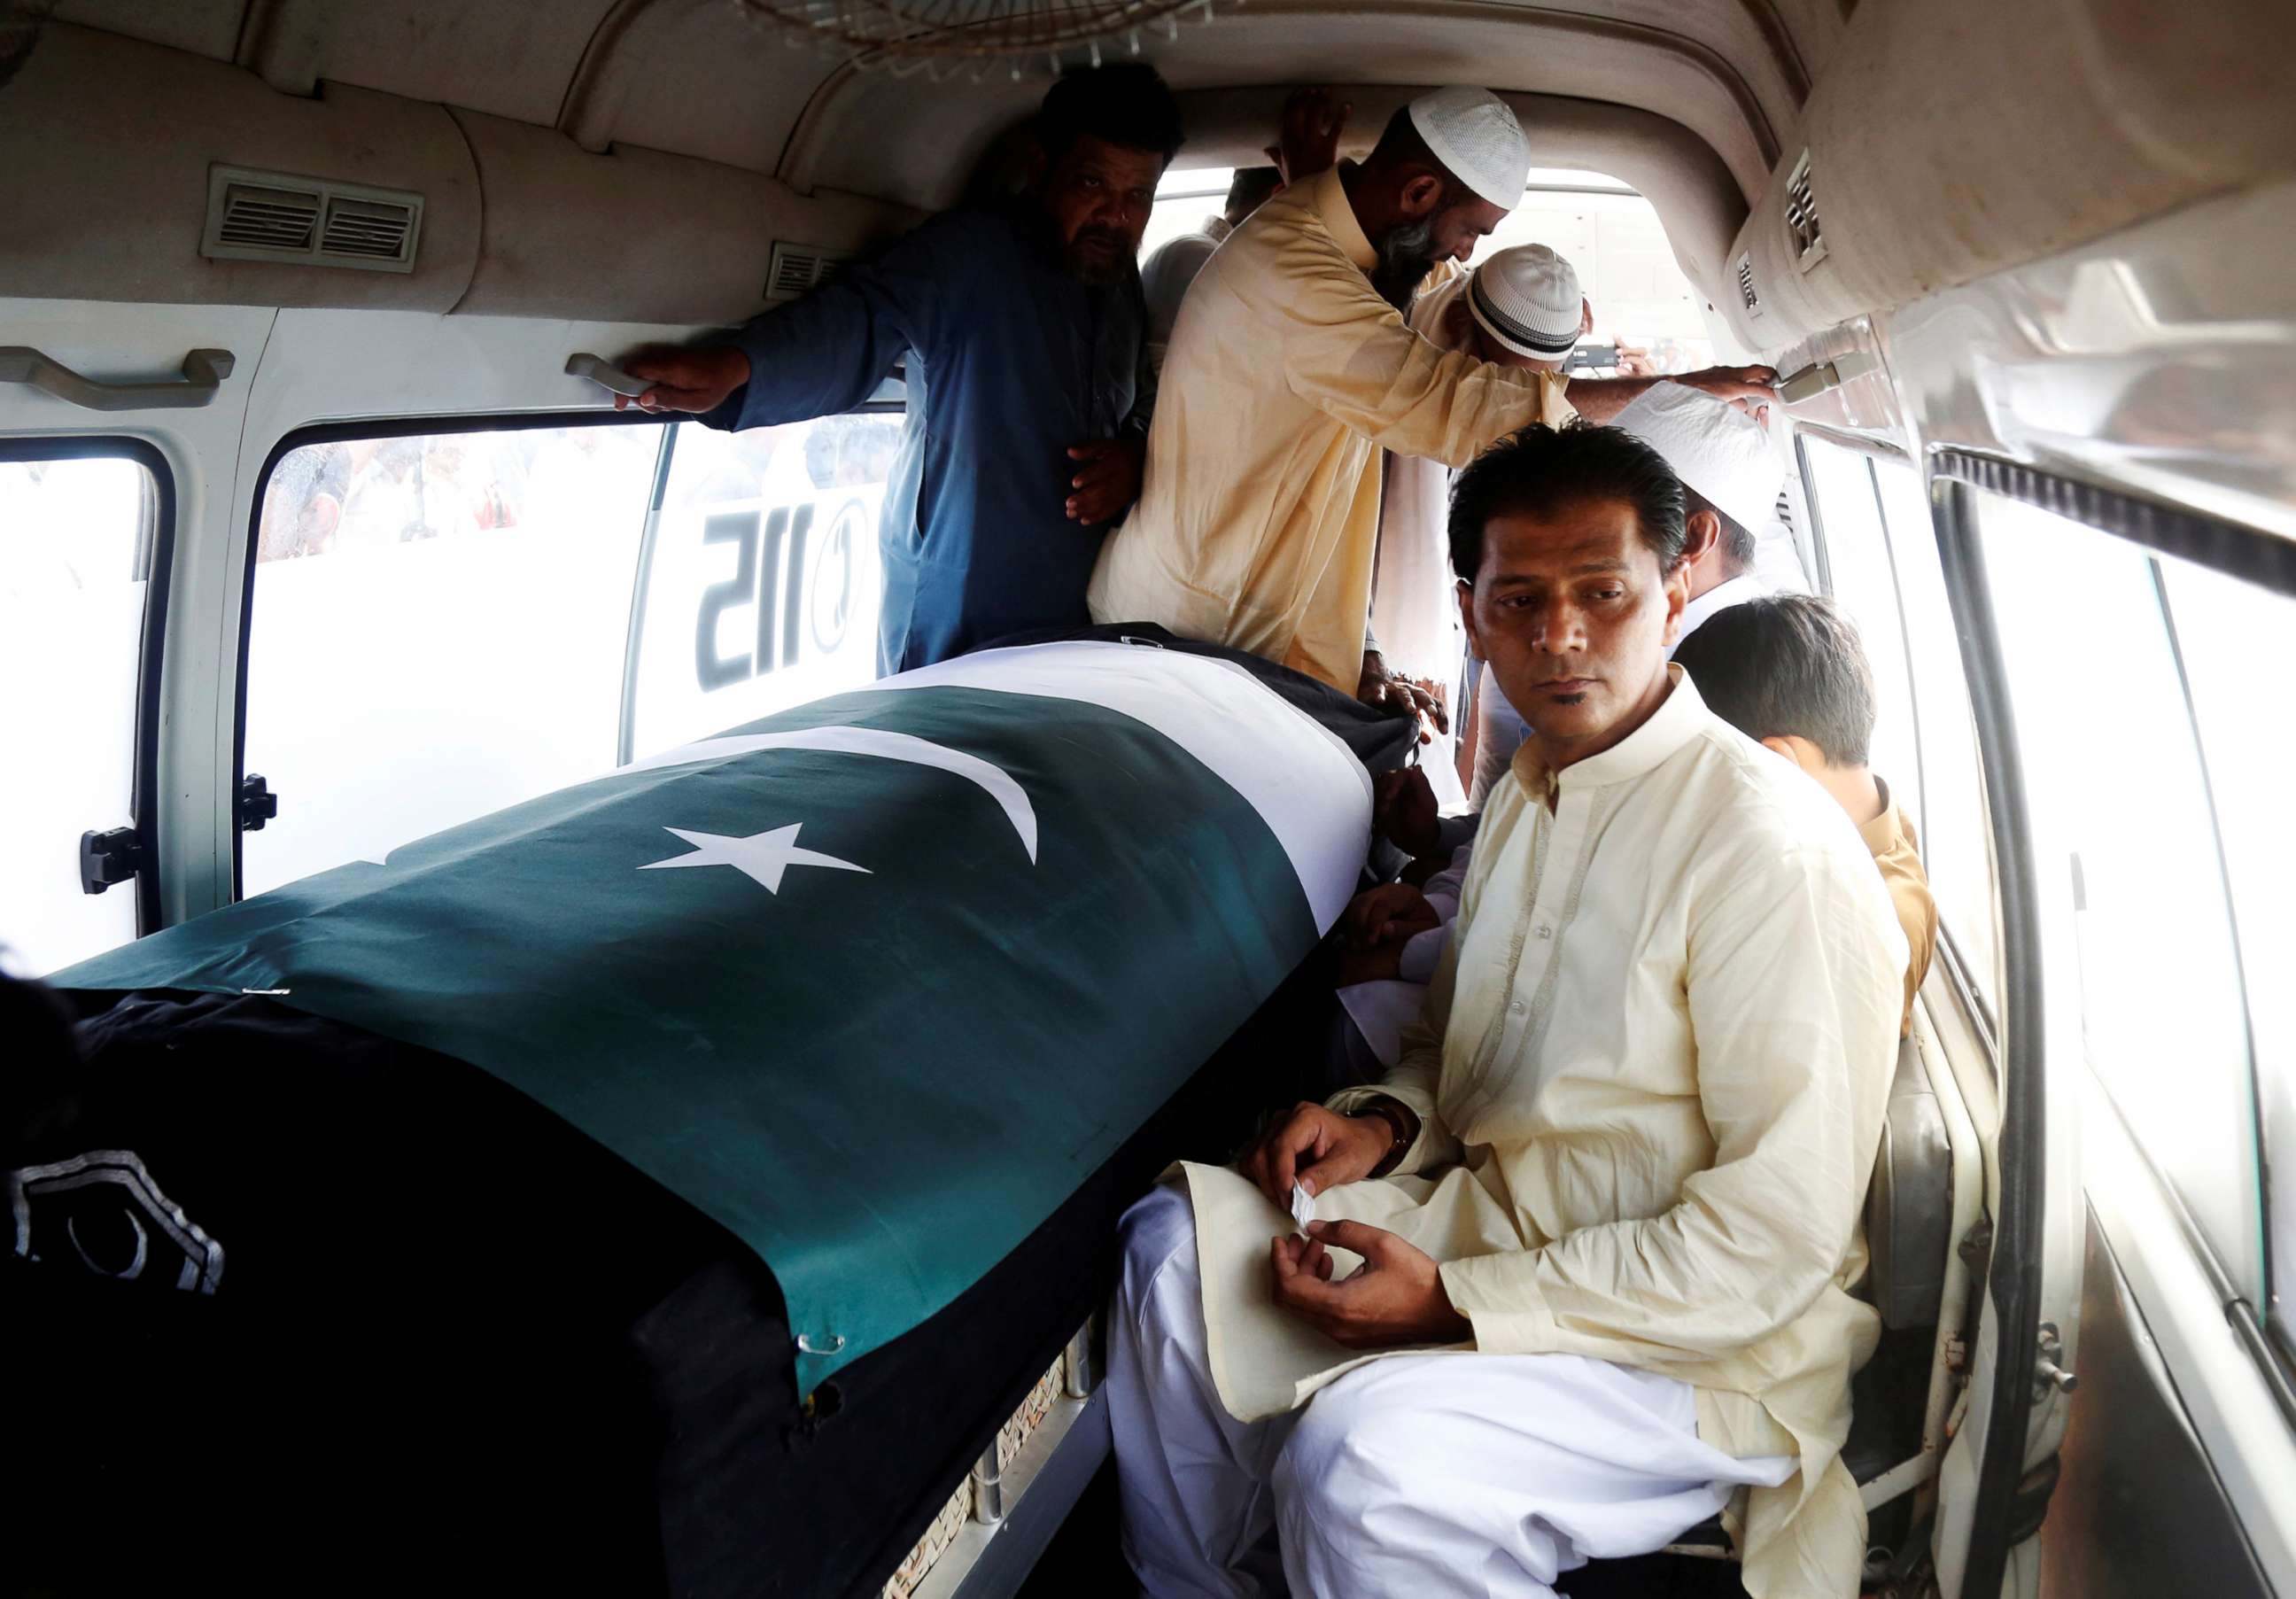 PHOTO: Aziz Sheikh father of Sabika Aziz Sheikh, who was killed when a gunman attacked Santa Fe High School in Santa Fe, Texas, sits in an ambulance next to her coffin, wrapped in national flag, during a funeral in Karachi, Pakistan May 23, 2018.